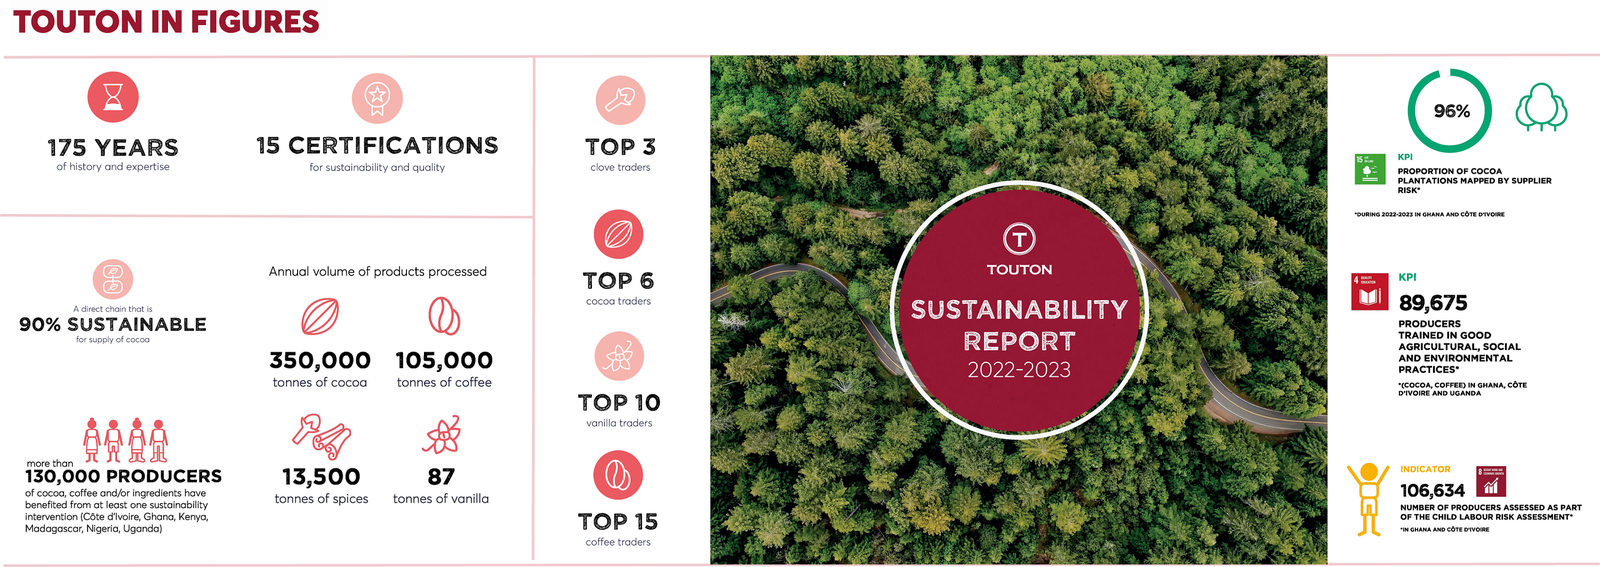 Sustainability report 22 23 Touton in Figures visual med